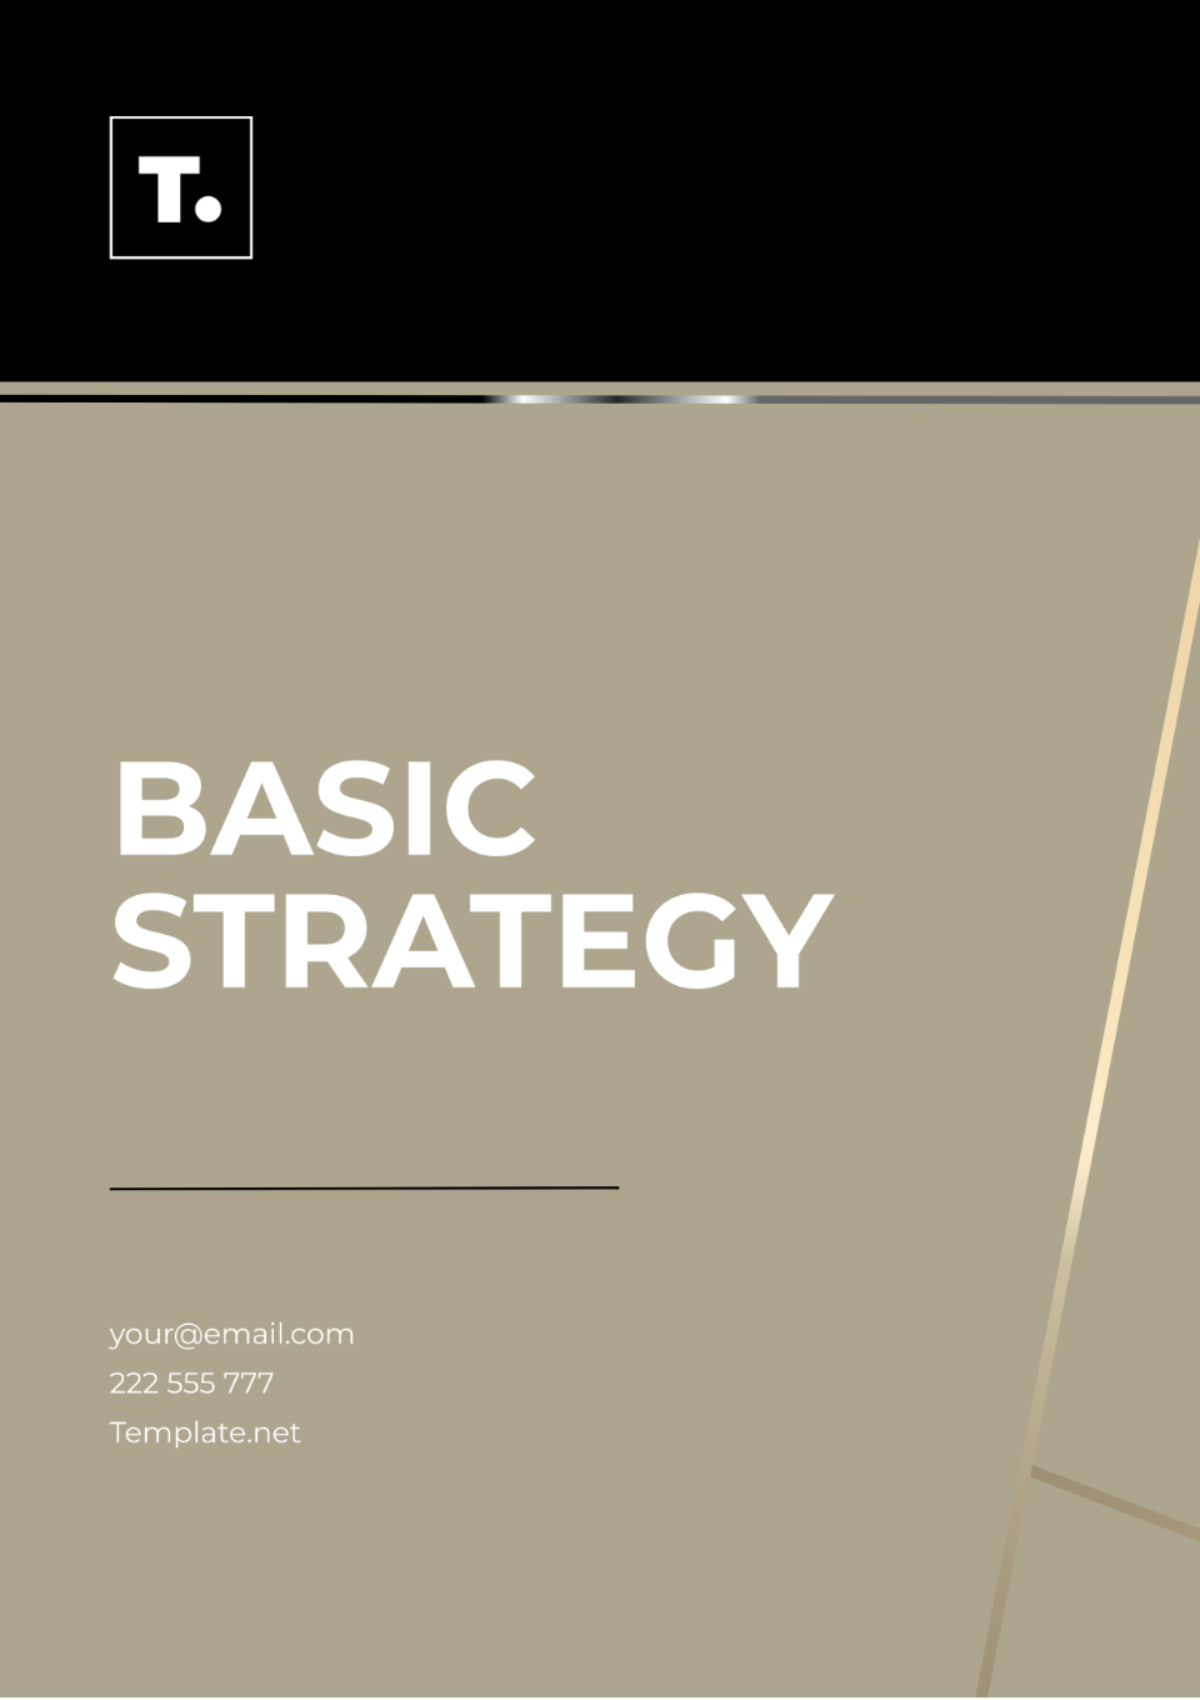 Basic Strategy Template